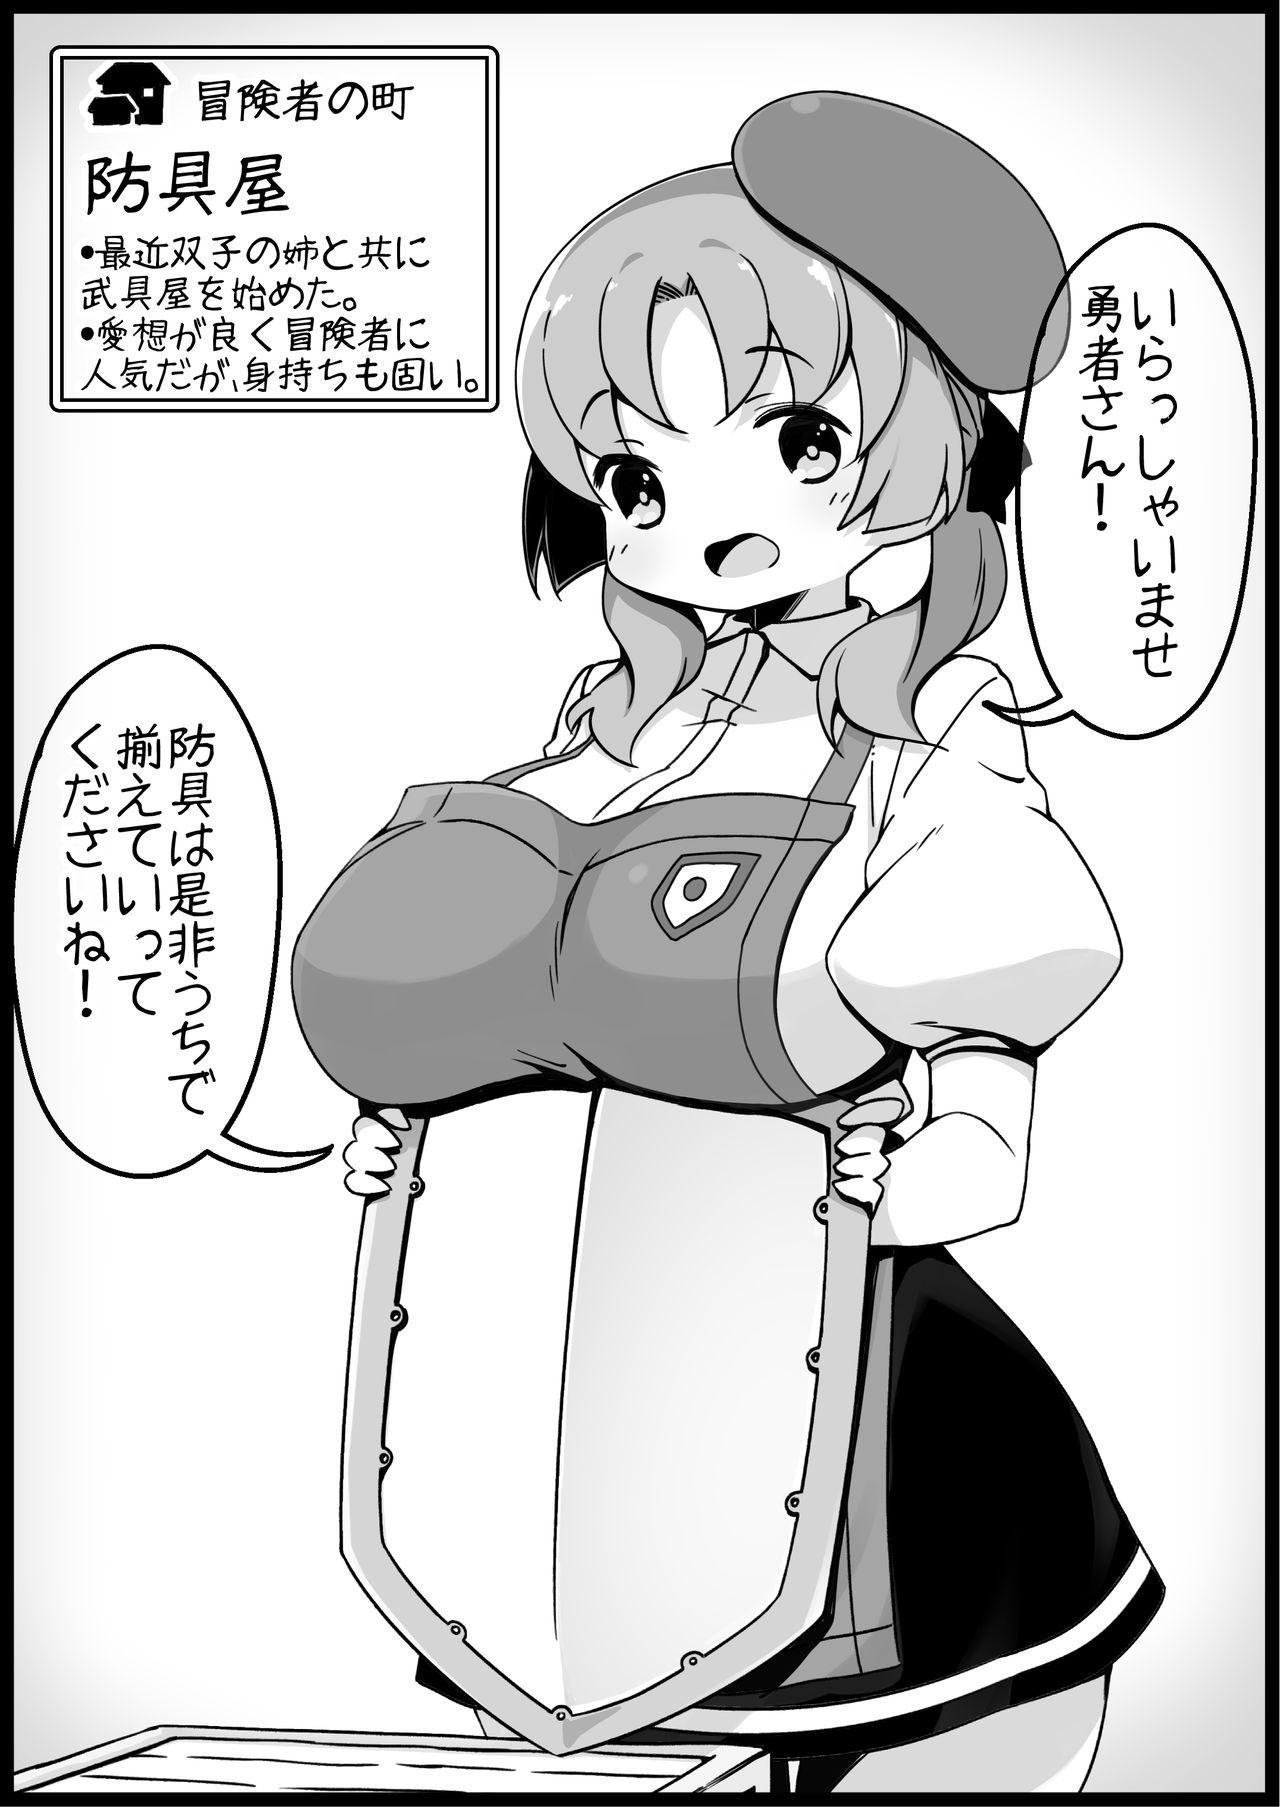 [Succubus Egg] Fantasy World 2 Too Forgiving to Heroes-Continued NPC (mob) Opponent-Centered Short H Manga Collection- 2